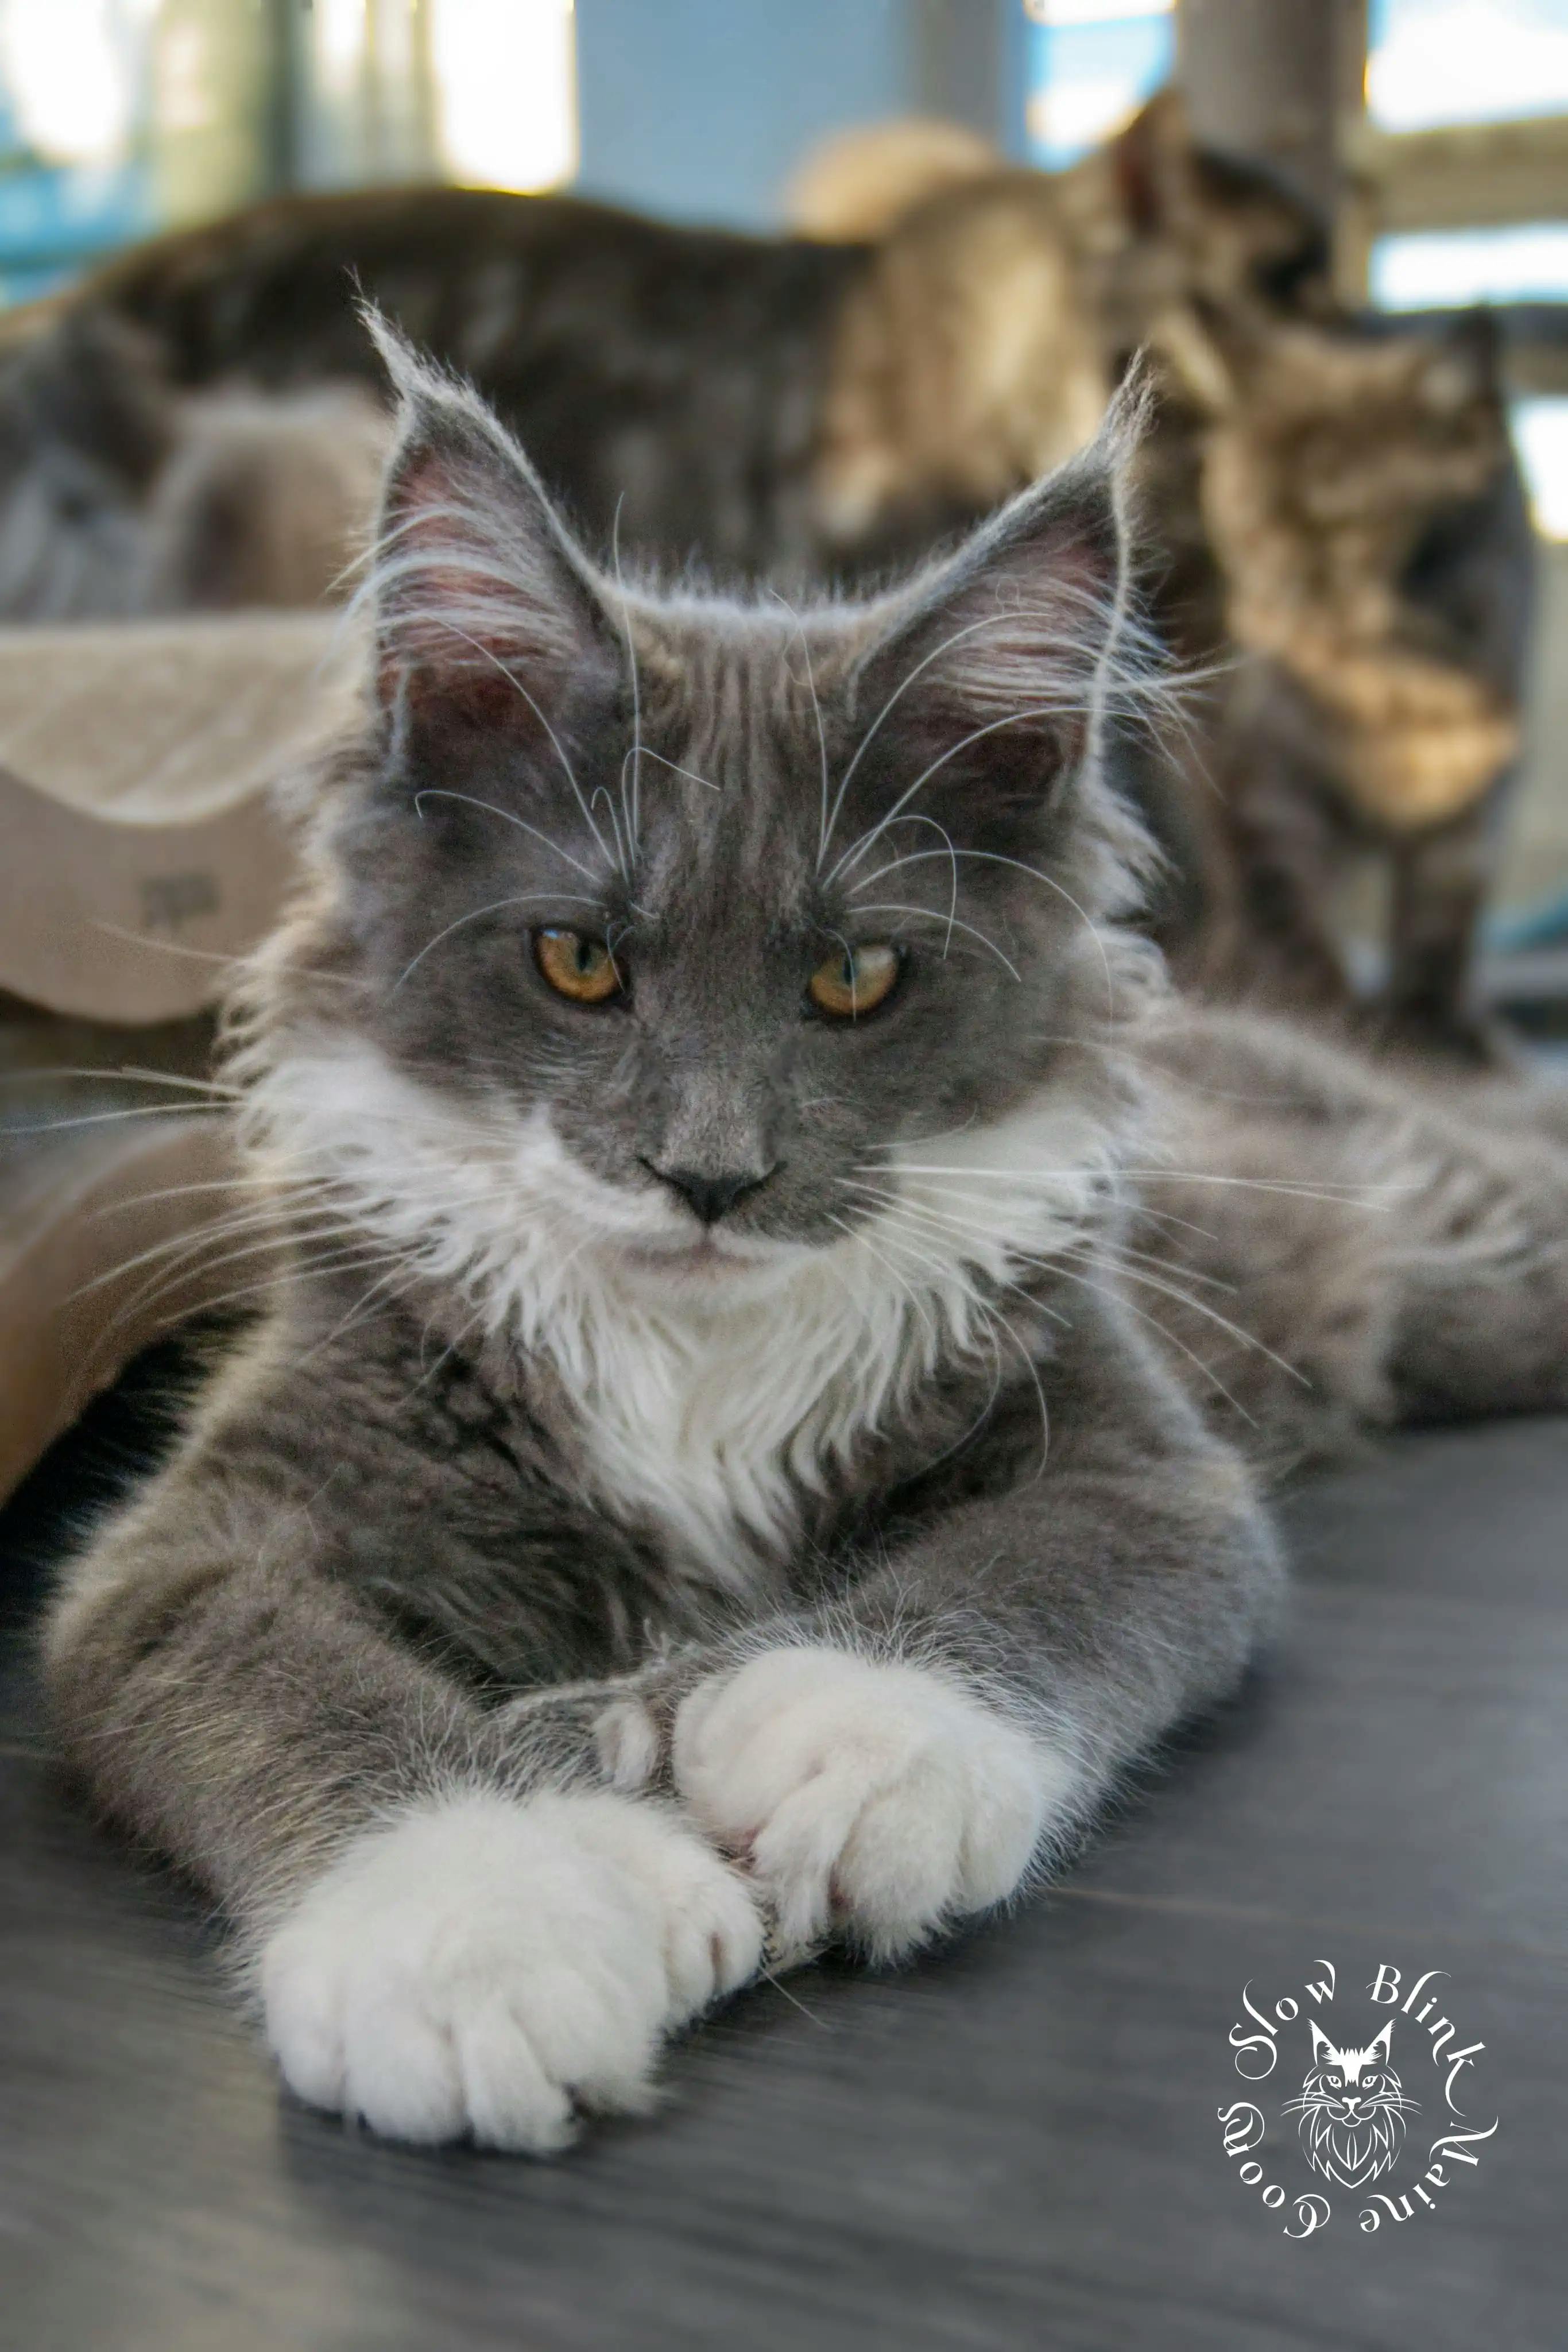 Adult Maine Coon Cat from SlowBlinkMaineCoons > blue smoke bicolor | male | maine coon | ems code as 03 | 6 month old | t rhett | lord at slowblink maine coons 2